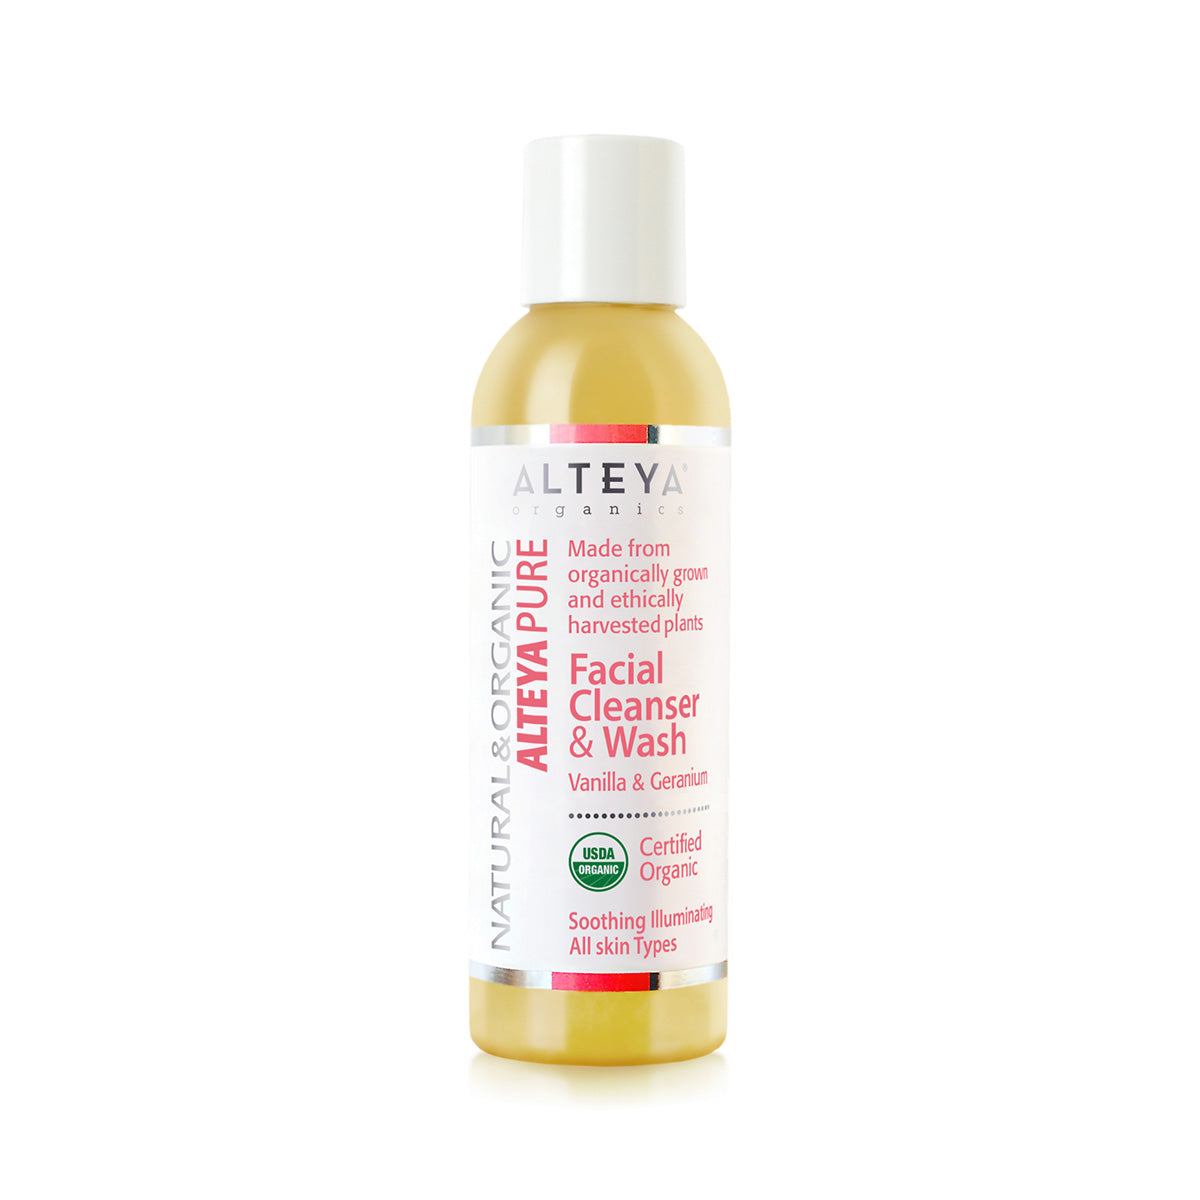 Gentle and Organic, Alteya’s Vanilla &amp; Geranium Facial Cleanser enriched with pure essential oils to gently and effectively clean skin from everyday impurities, make up, and excess oils. Skin looks and feels fresh, soft and healthy. The sensual Vanilla and Geranium soothe and calm skin and help improve skin’s tone and texture.